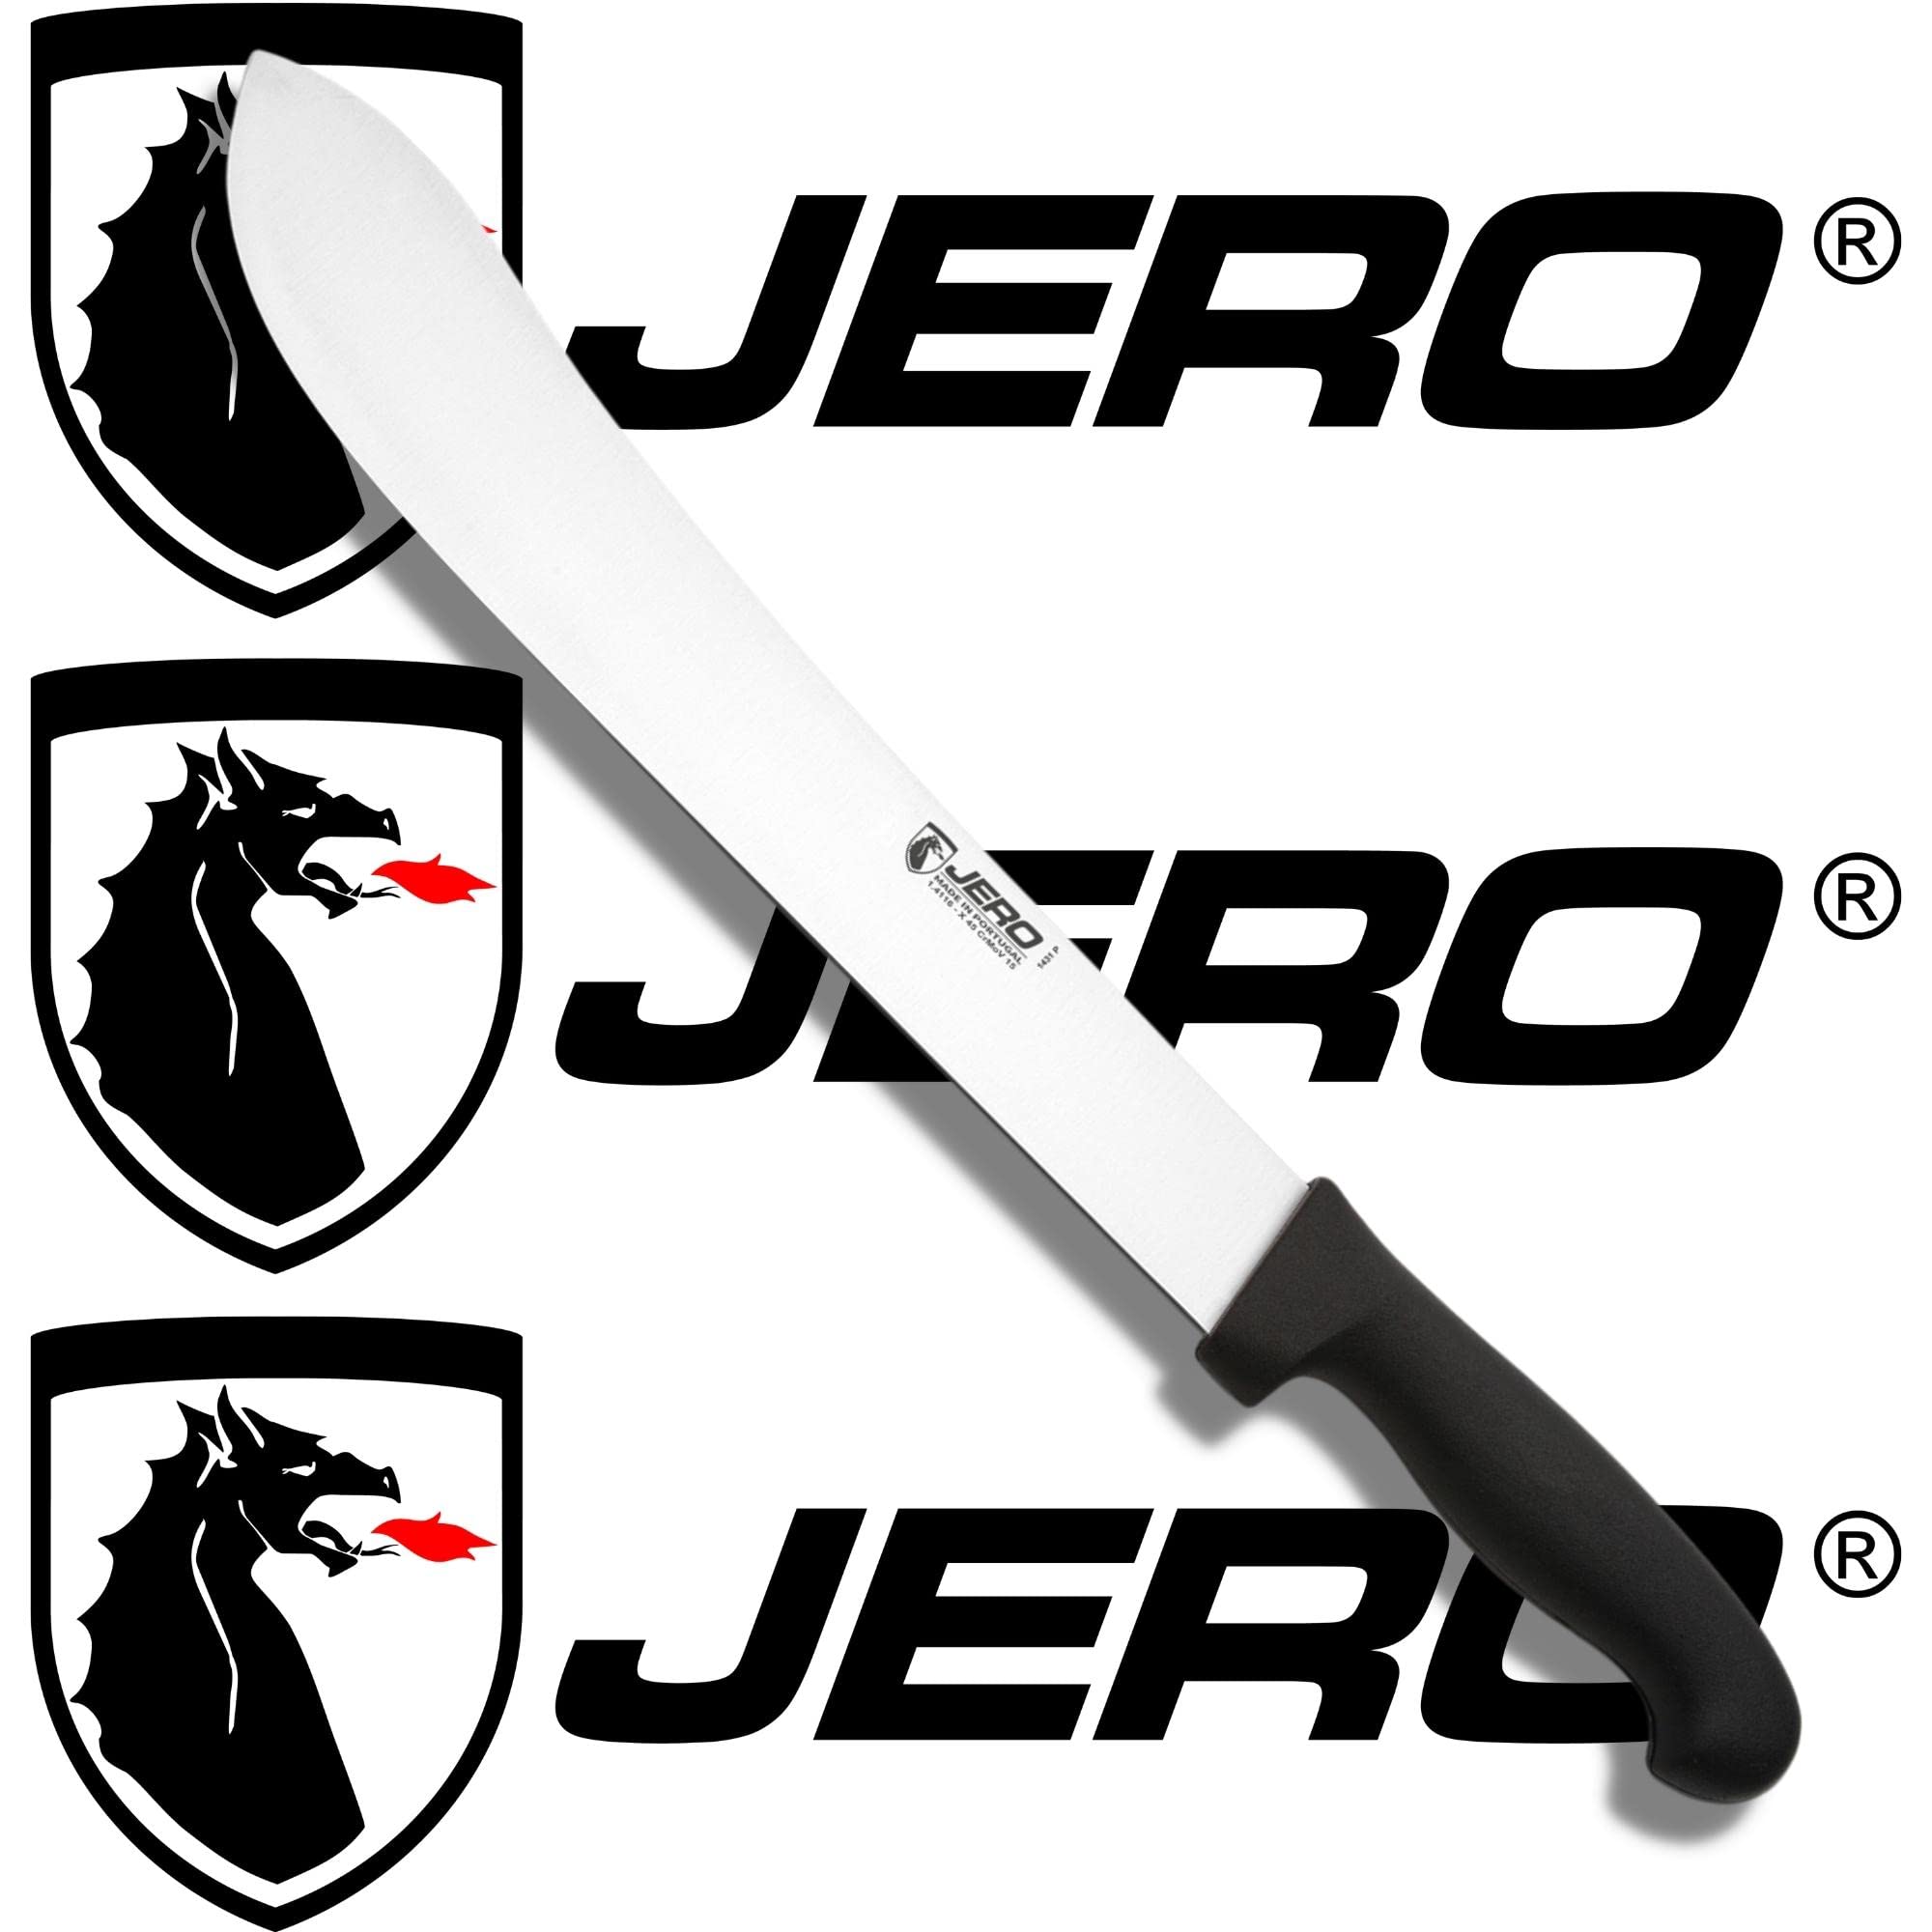 Jero Commercial Series - 12 Inch Traditional Style Butcher Knife - High Carbon Stainless Steel - Large Grip Poly Handle - Made in Portugal